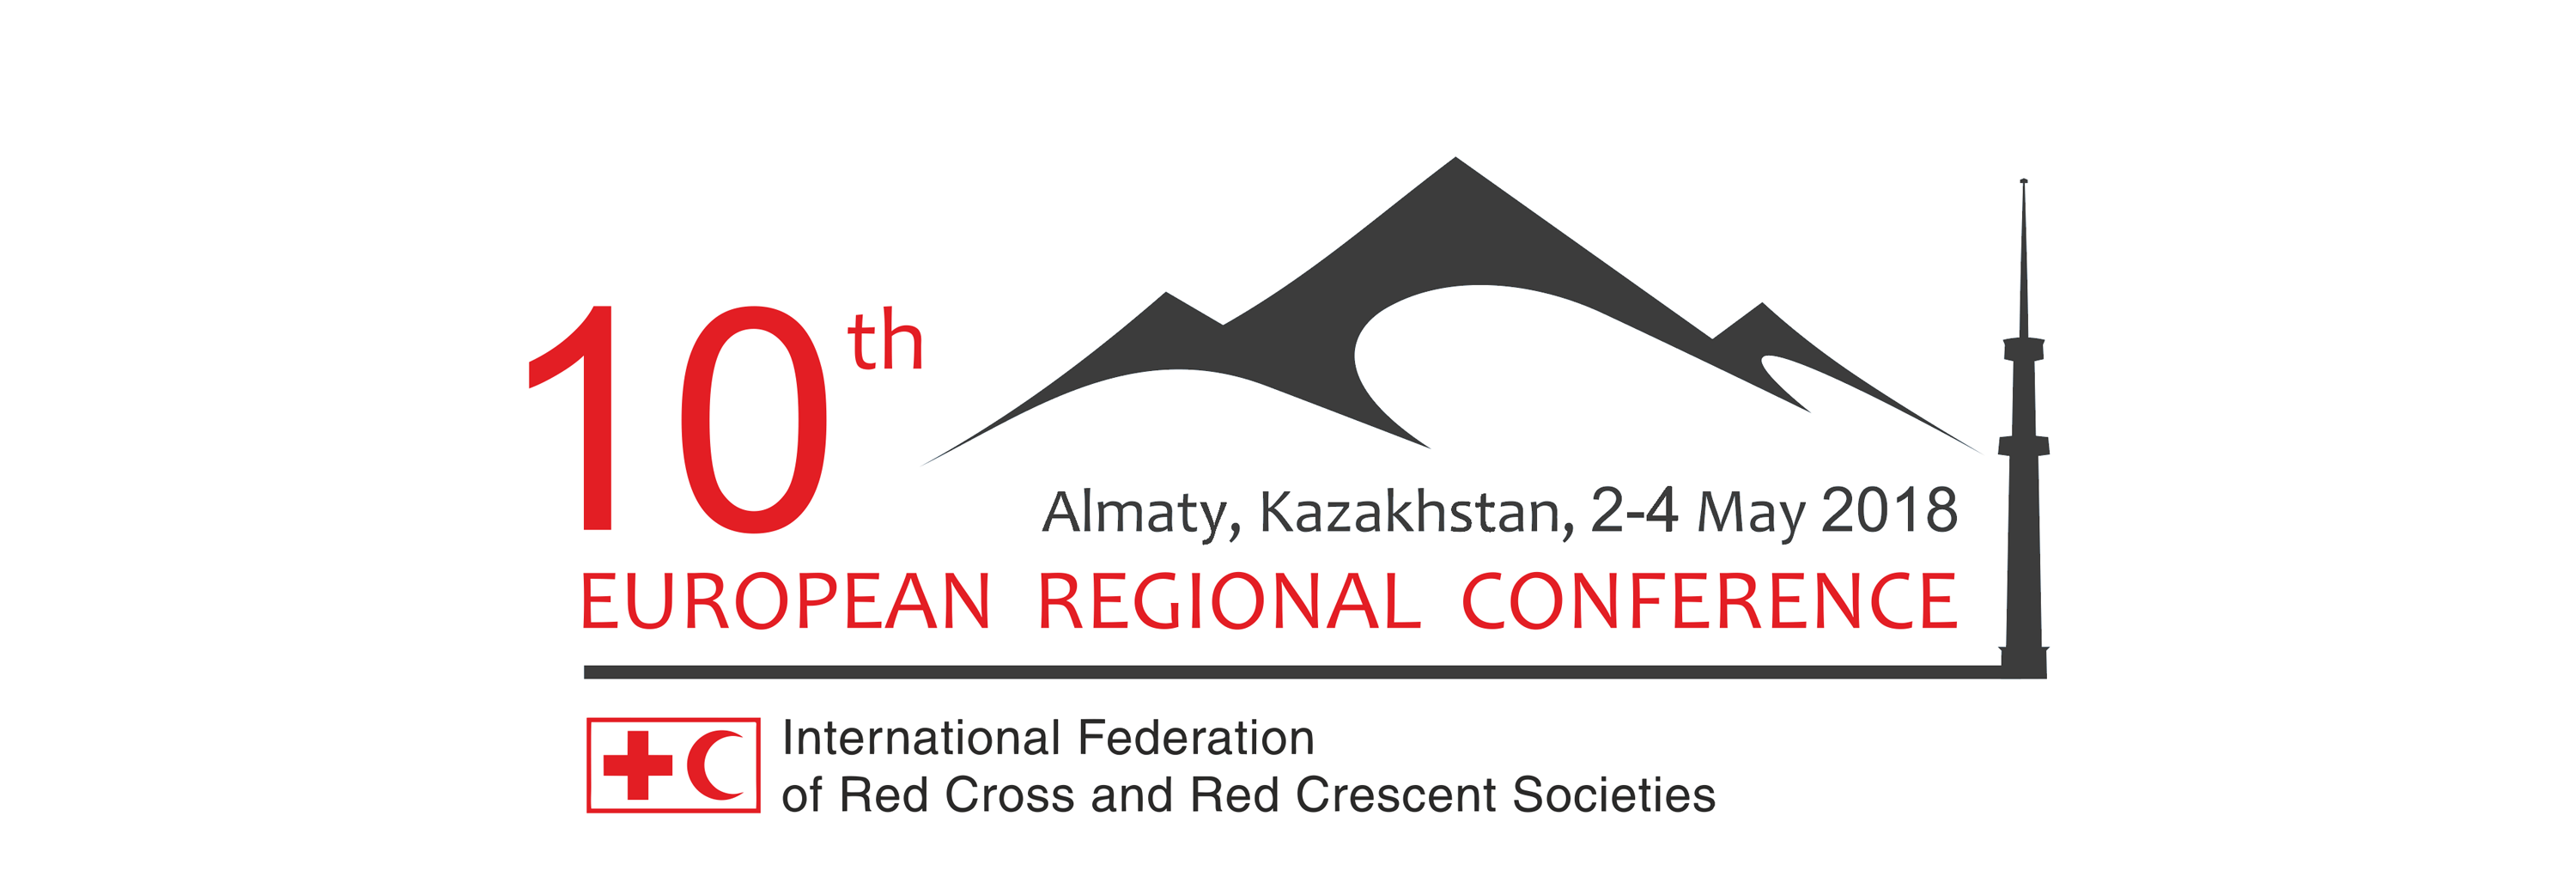 Ifrc Logo - 10th European Regional Conference of the Red Cross and Red Crescent ...